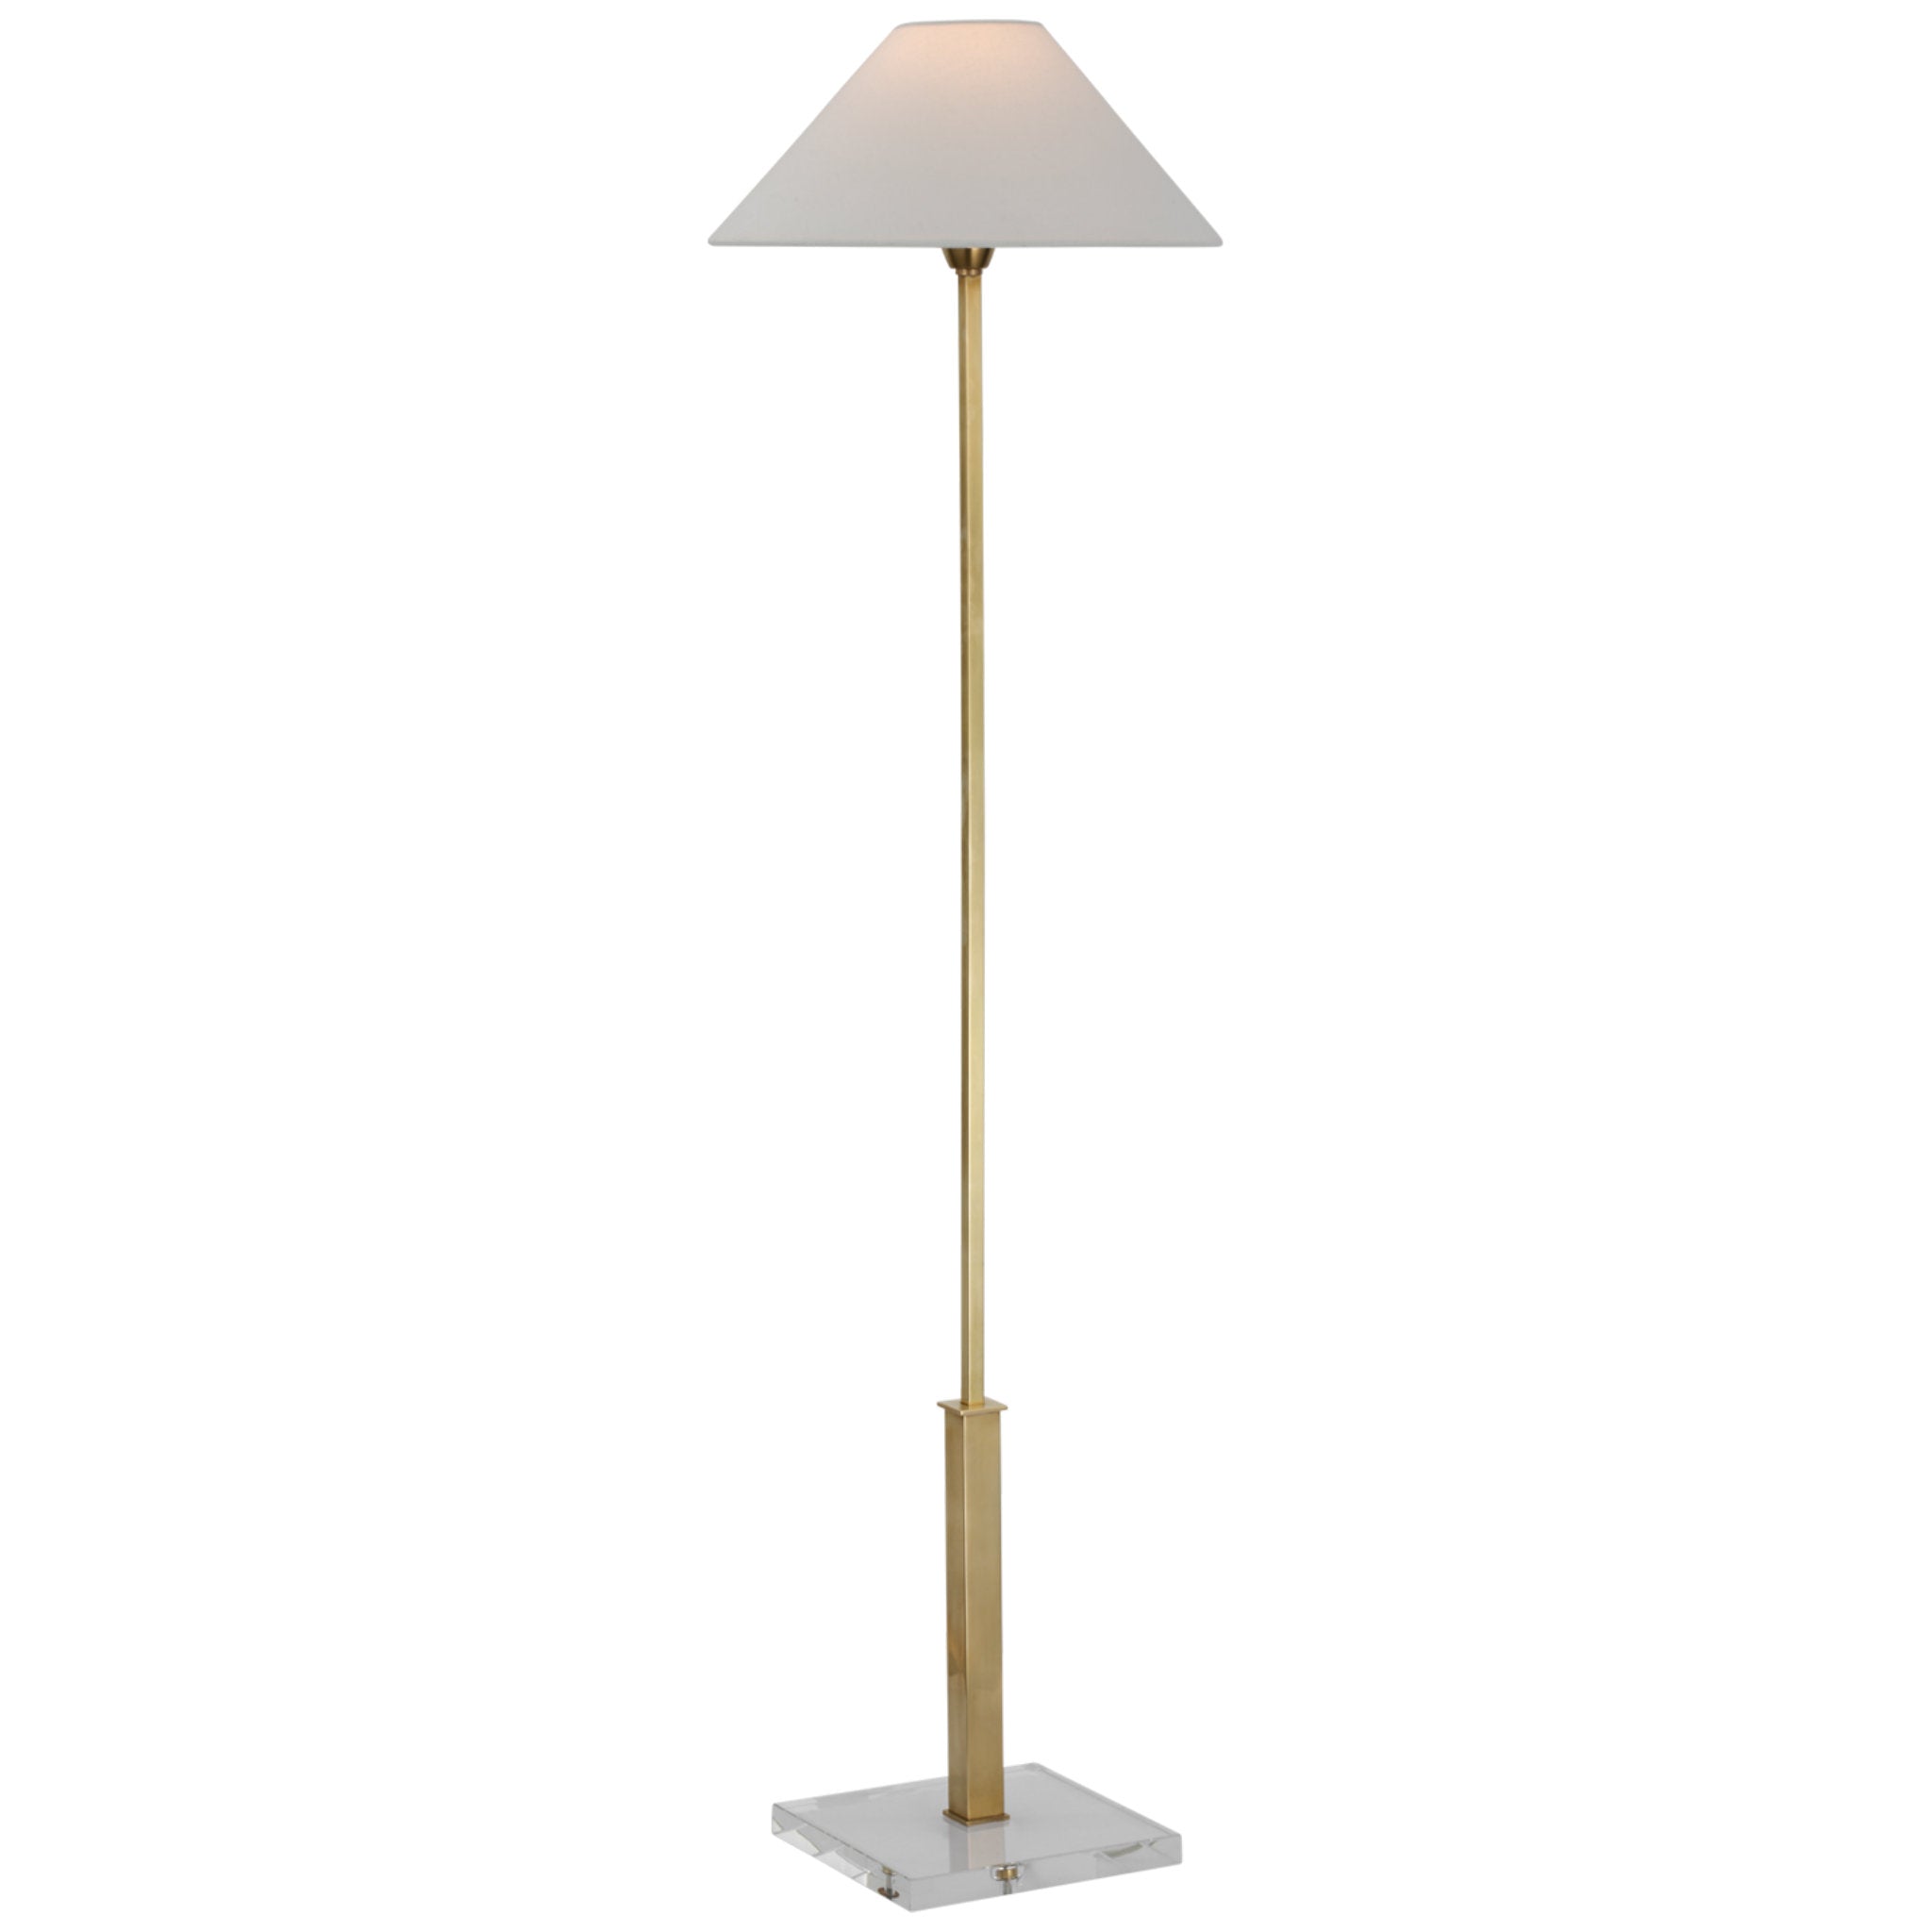 J. Randall Powers Asher Floor Lamp in Hand-Rubbed Antique Brass and Crystal with Linen Shade